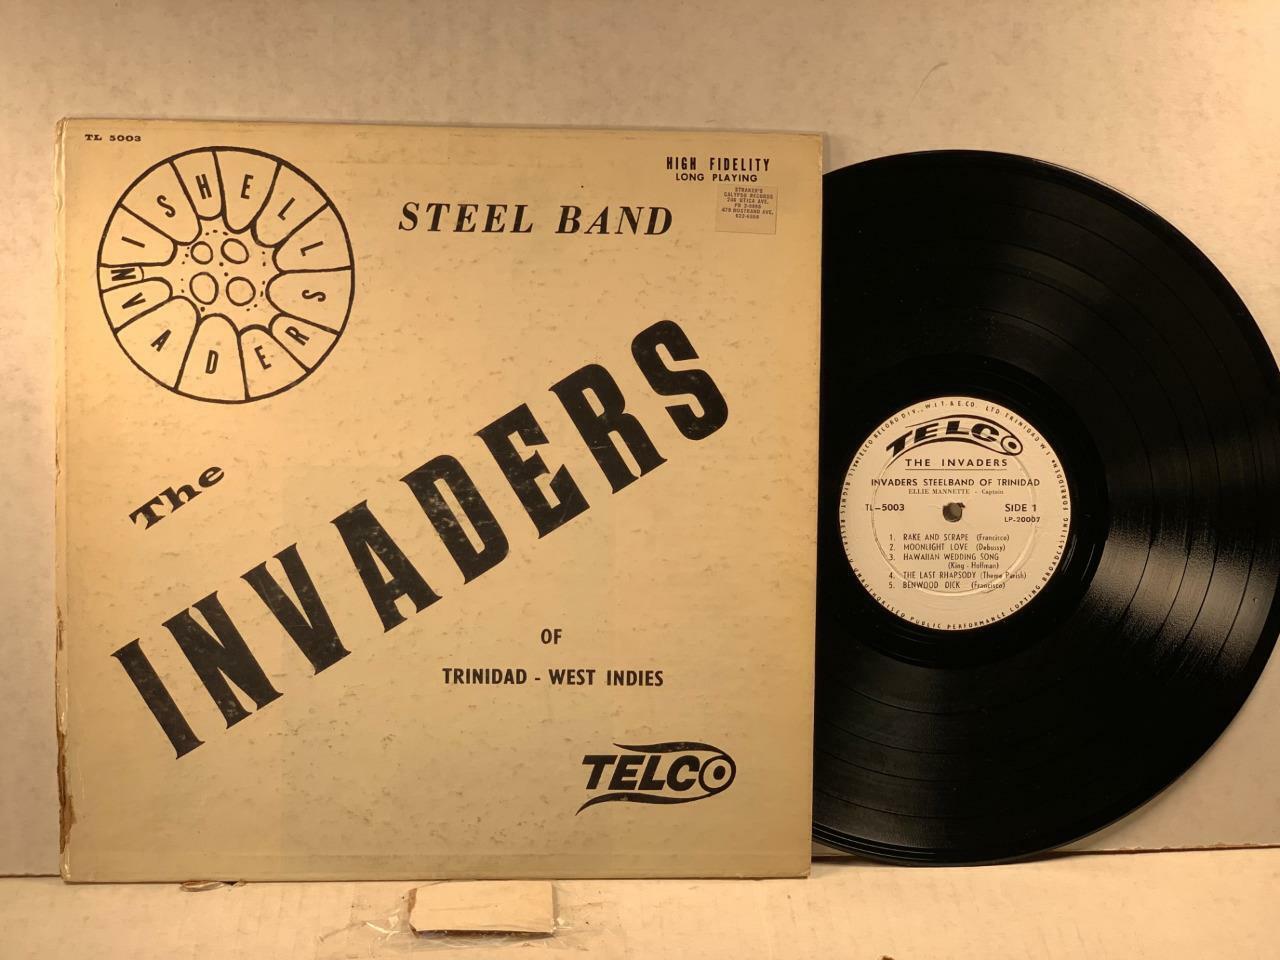 THE INVADERS STEEL BAND OF TRINIDAD Telco TL 5003  FROM 1960   VG    LISTEN